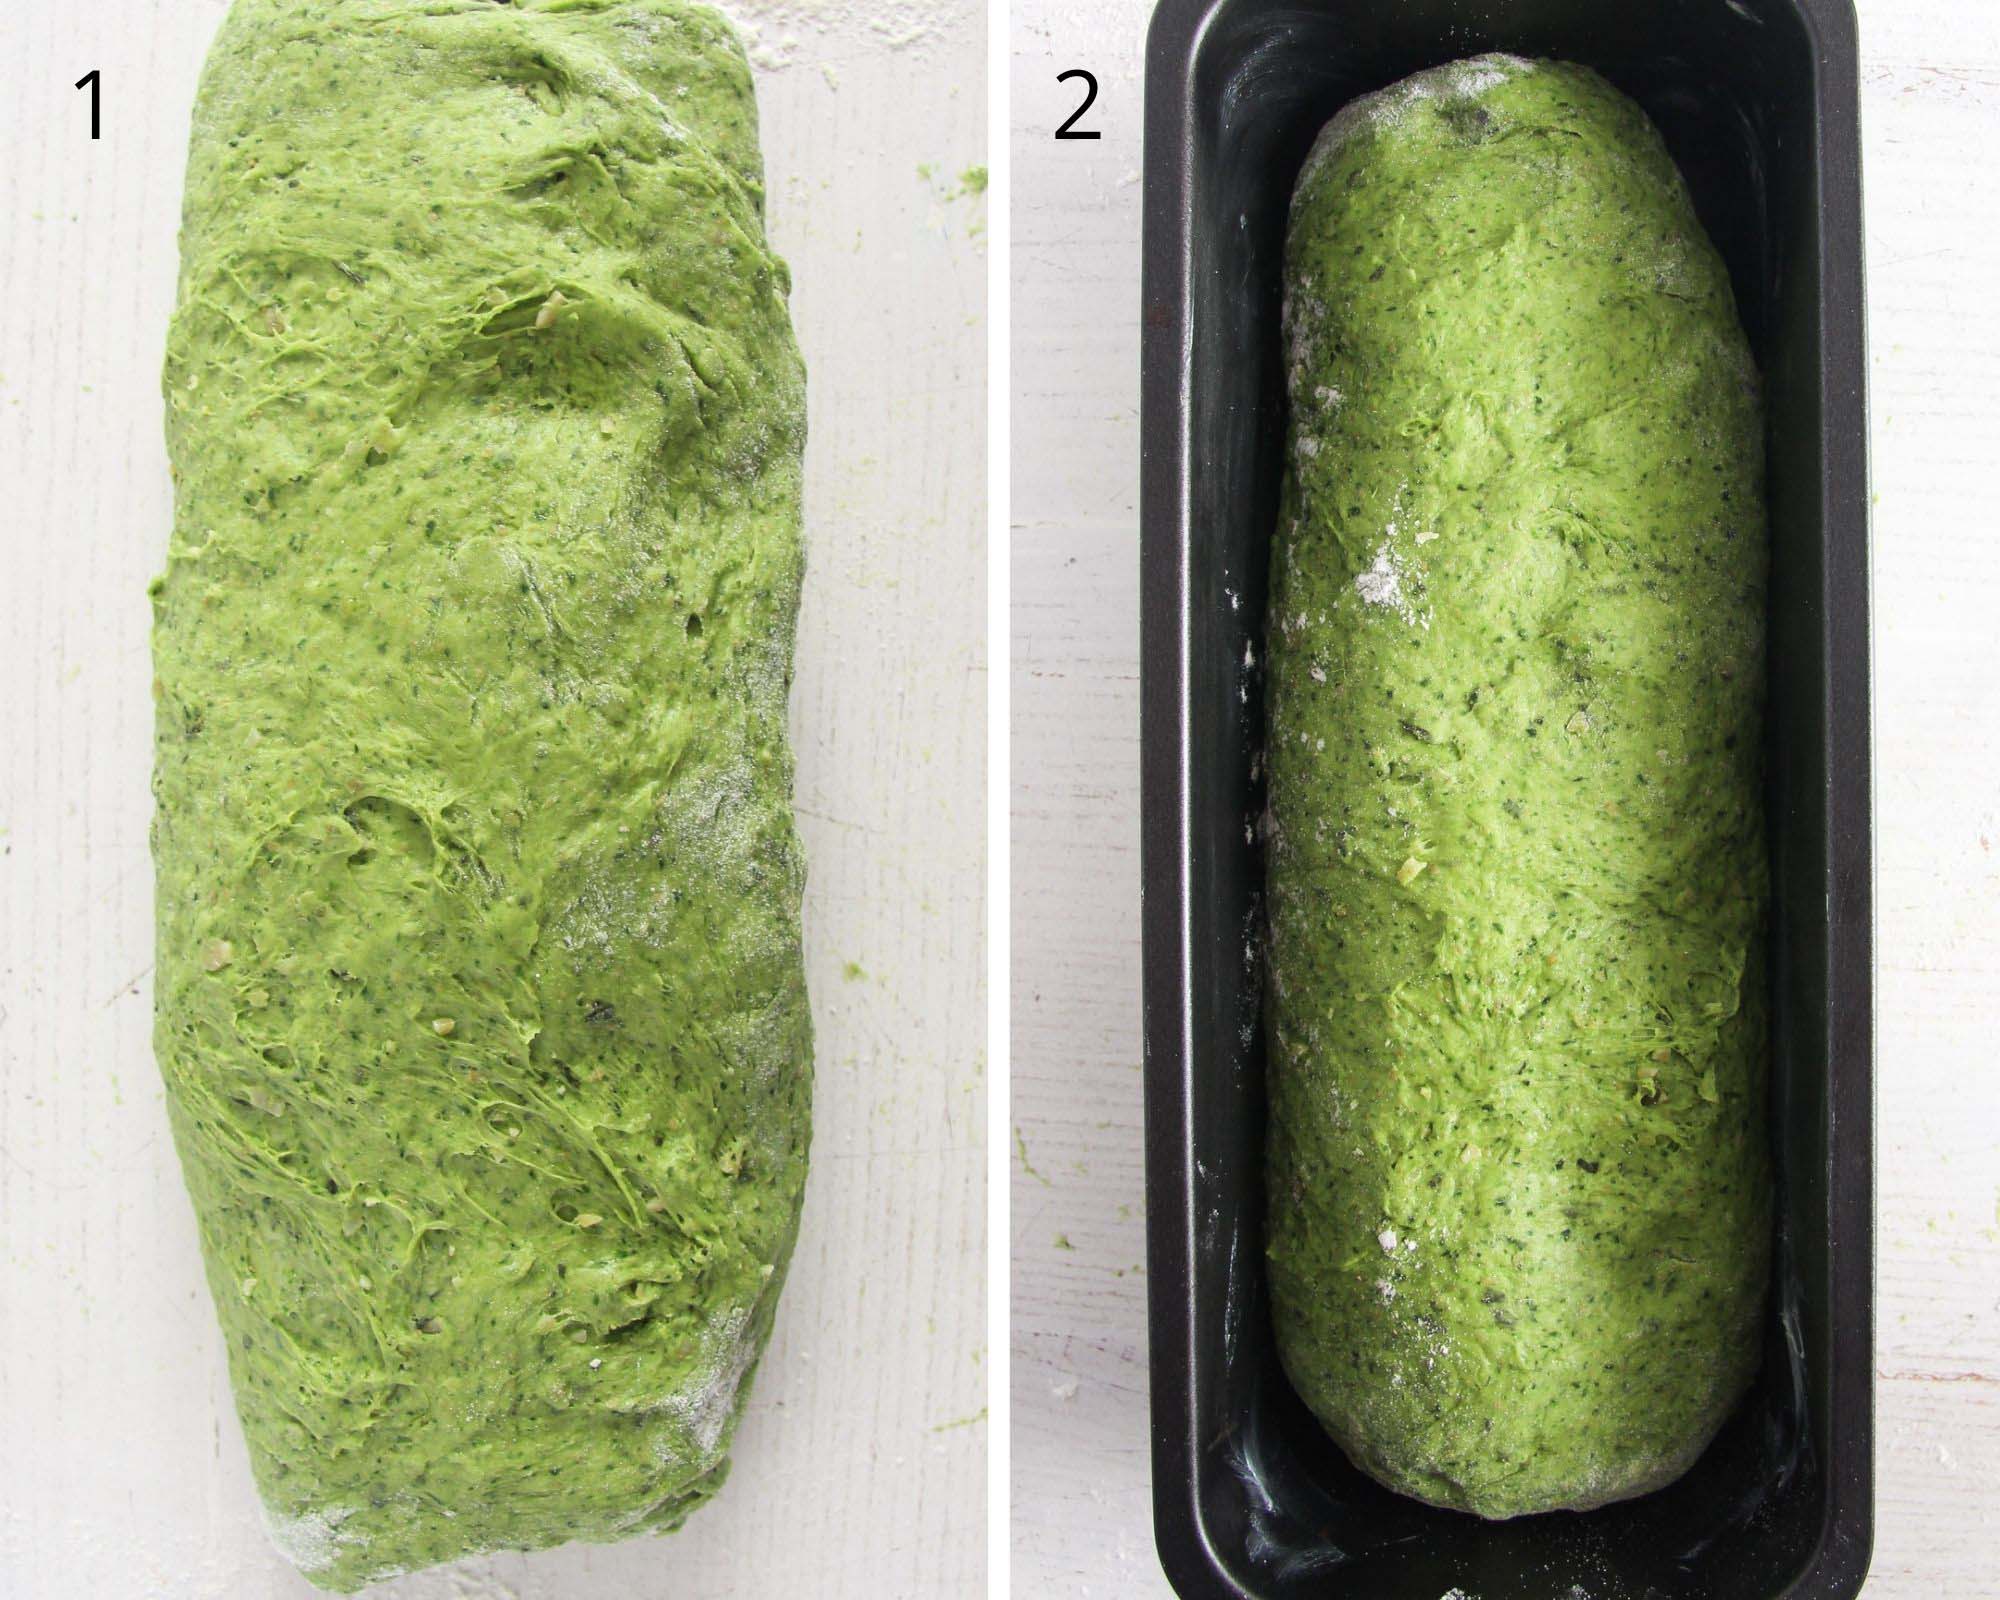 green dough folded and in a baking tin.